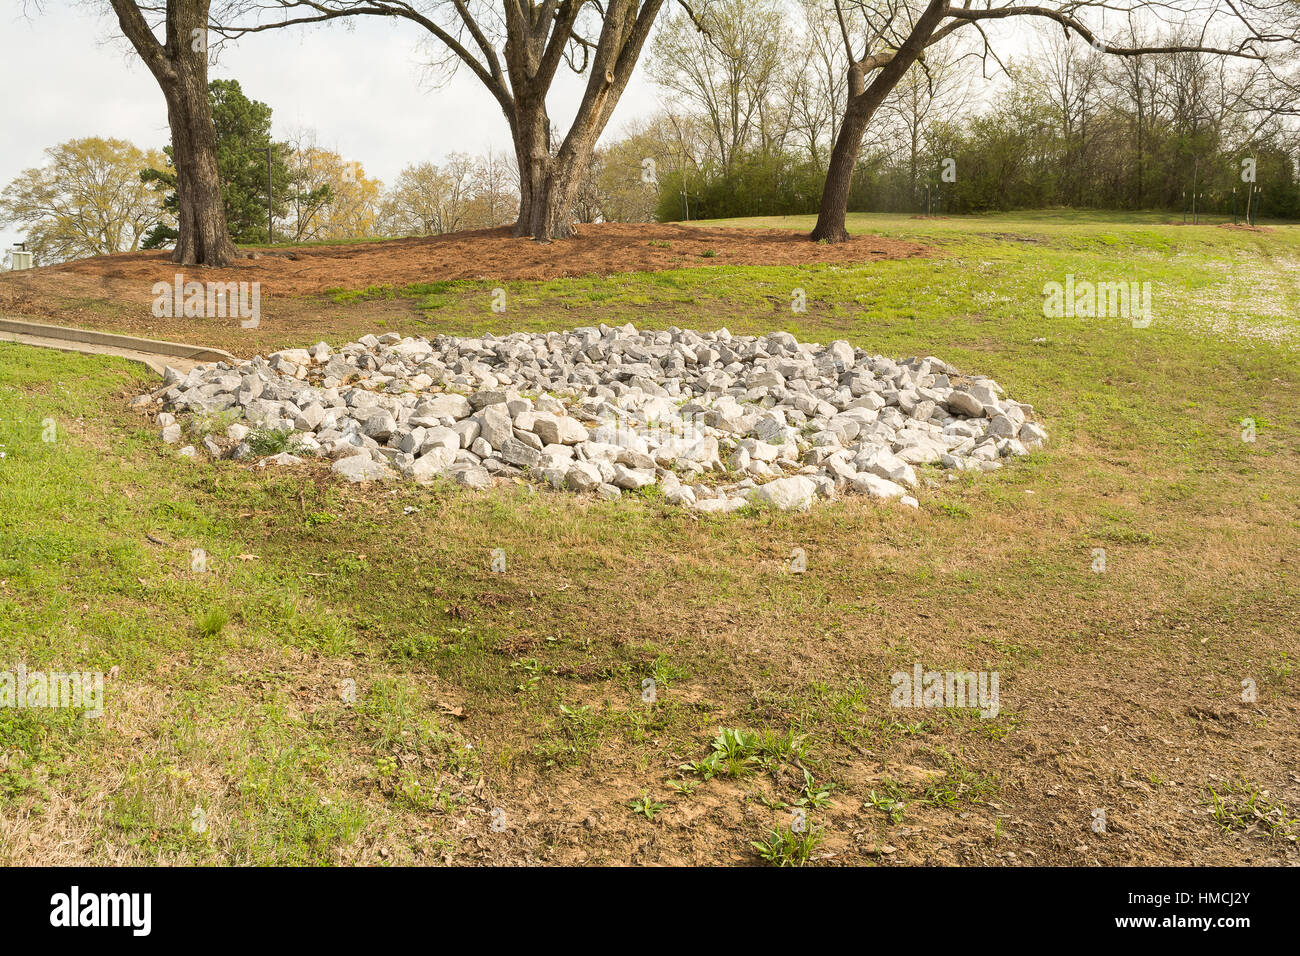 A manmade, concrete, watershed with a strategically placed pile of rocks to slow the runoff of water and minimize erosion. Stock Photo